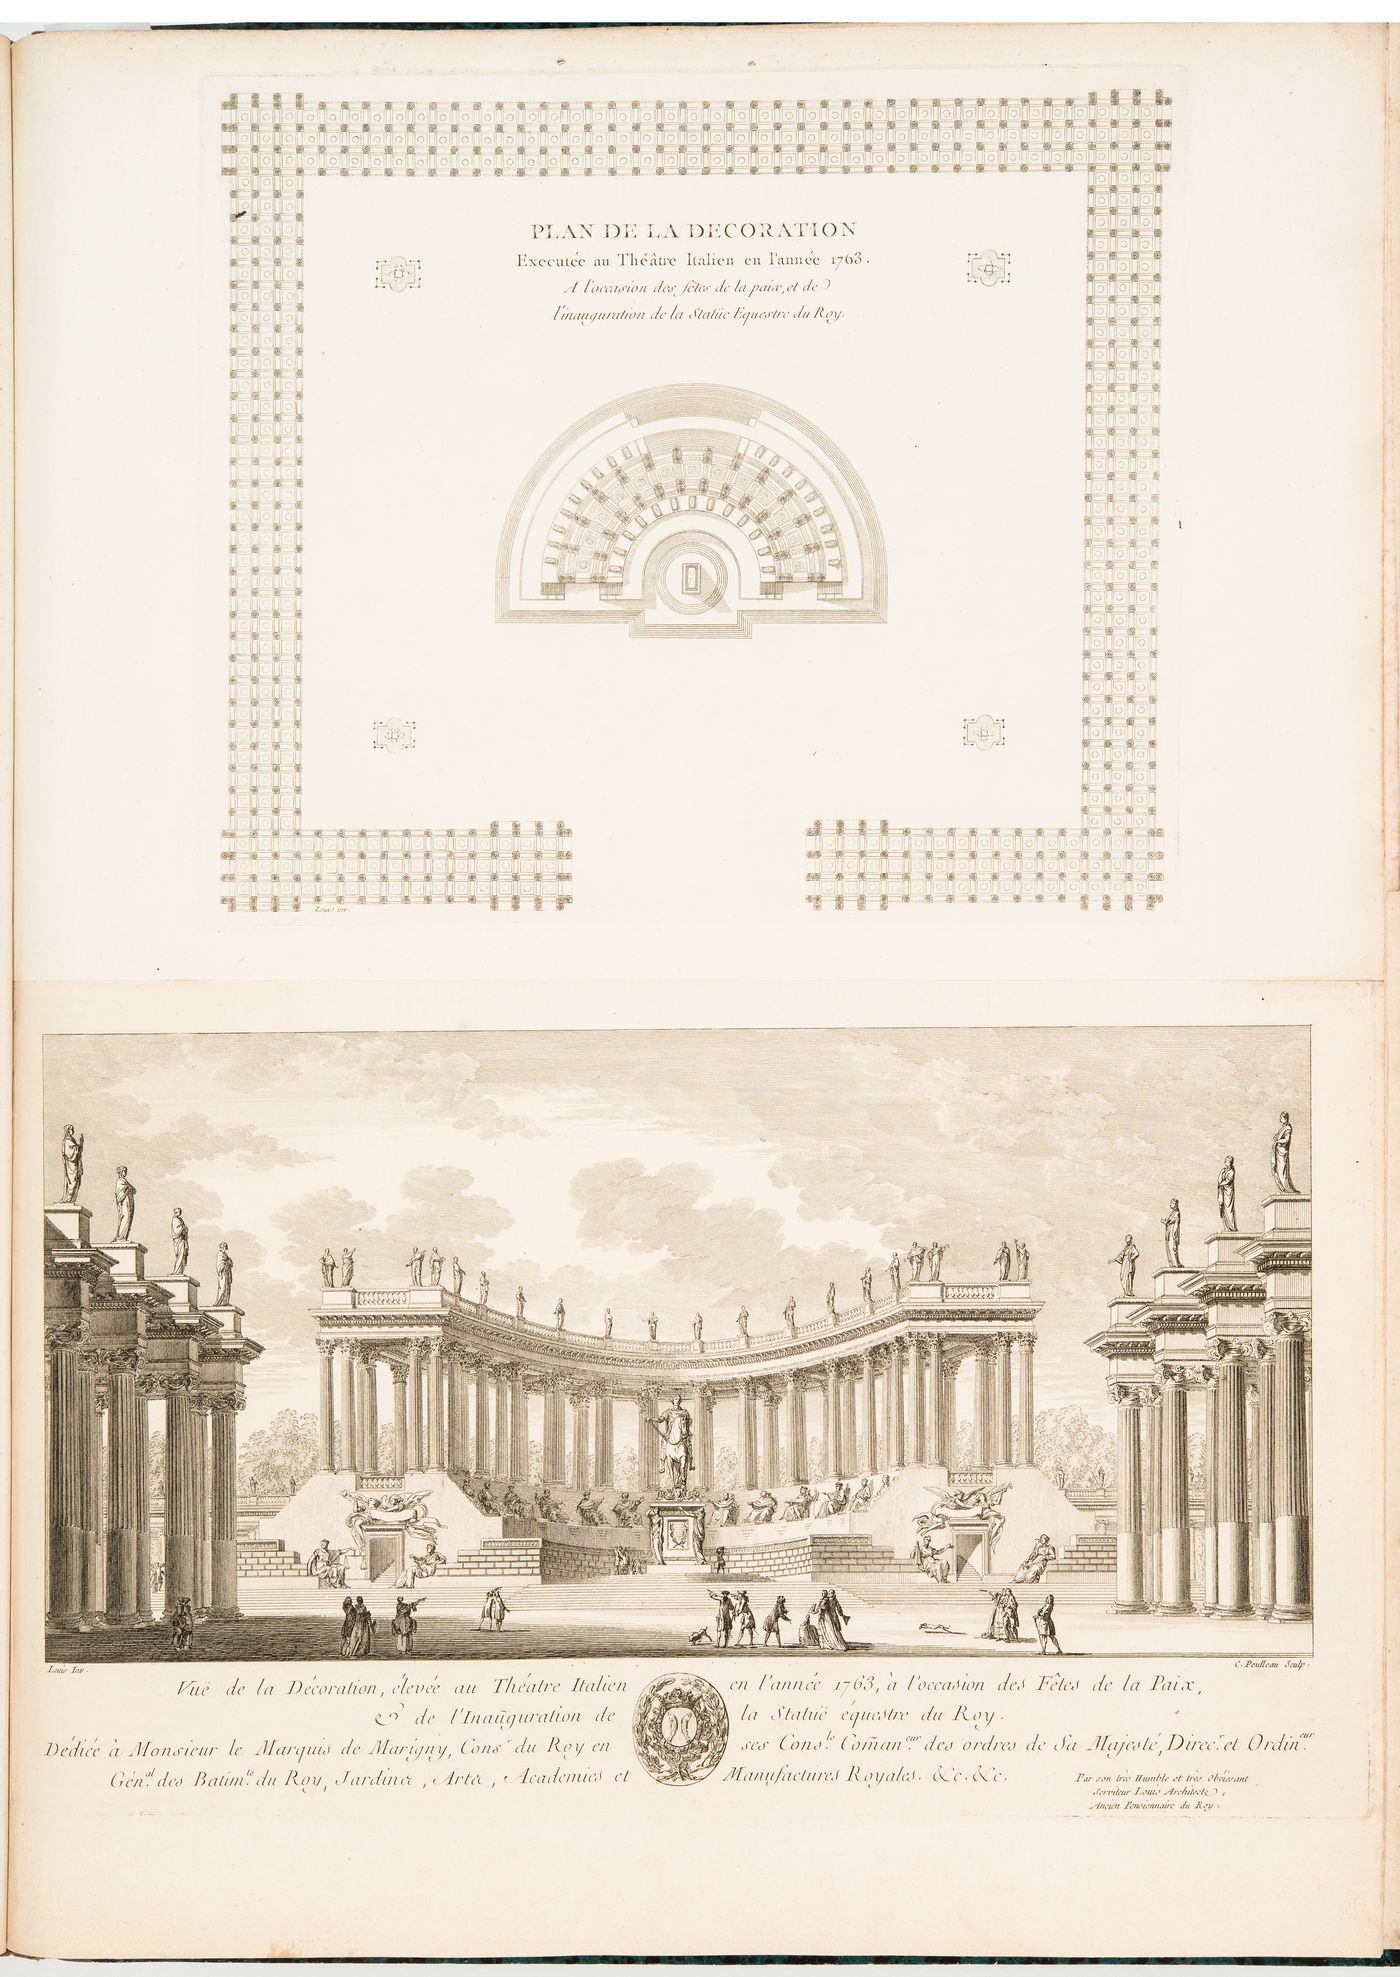 Decorations for the Théâtre italien for the fêtes de la paix and the inauguration of the equestrian statue of Louis XV, Paris: Plan